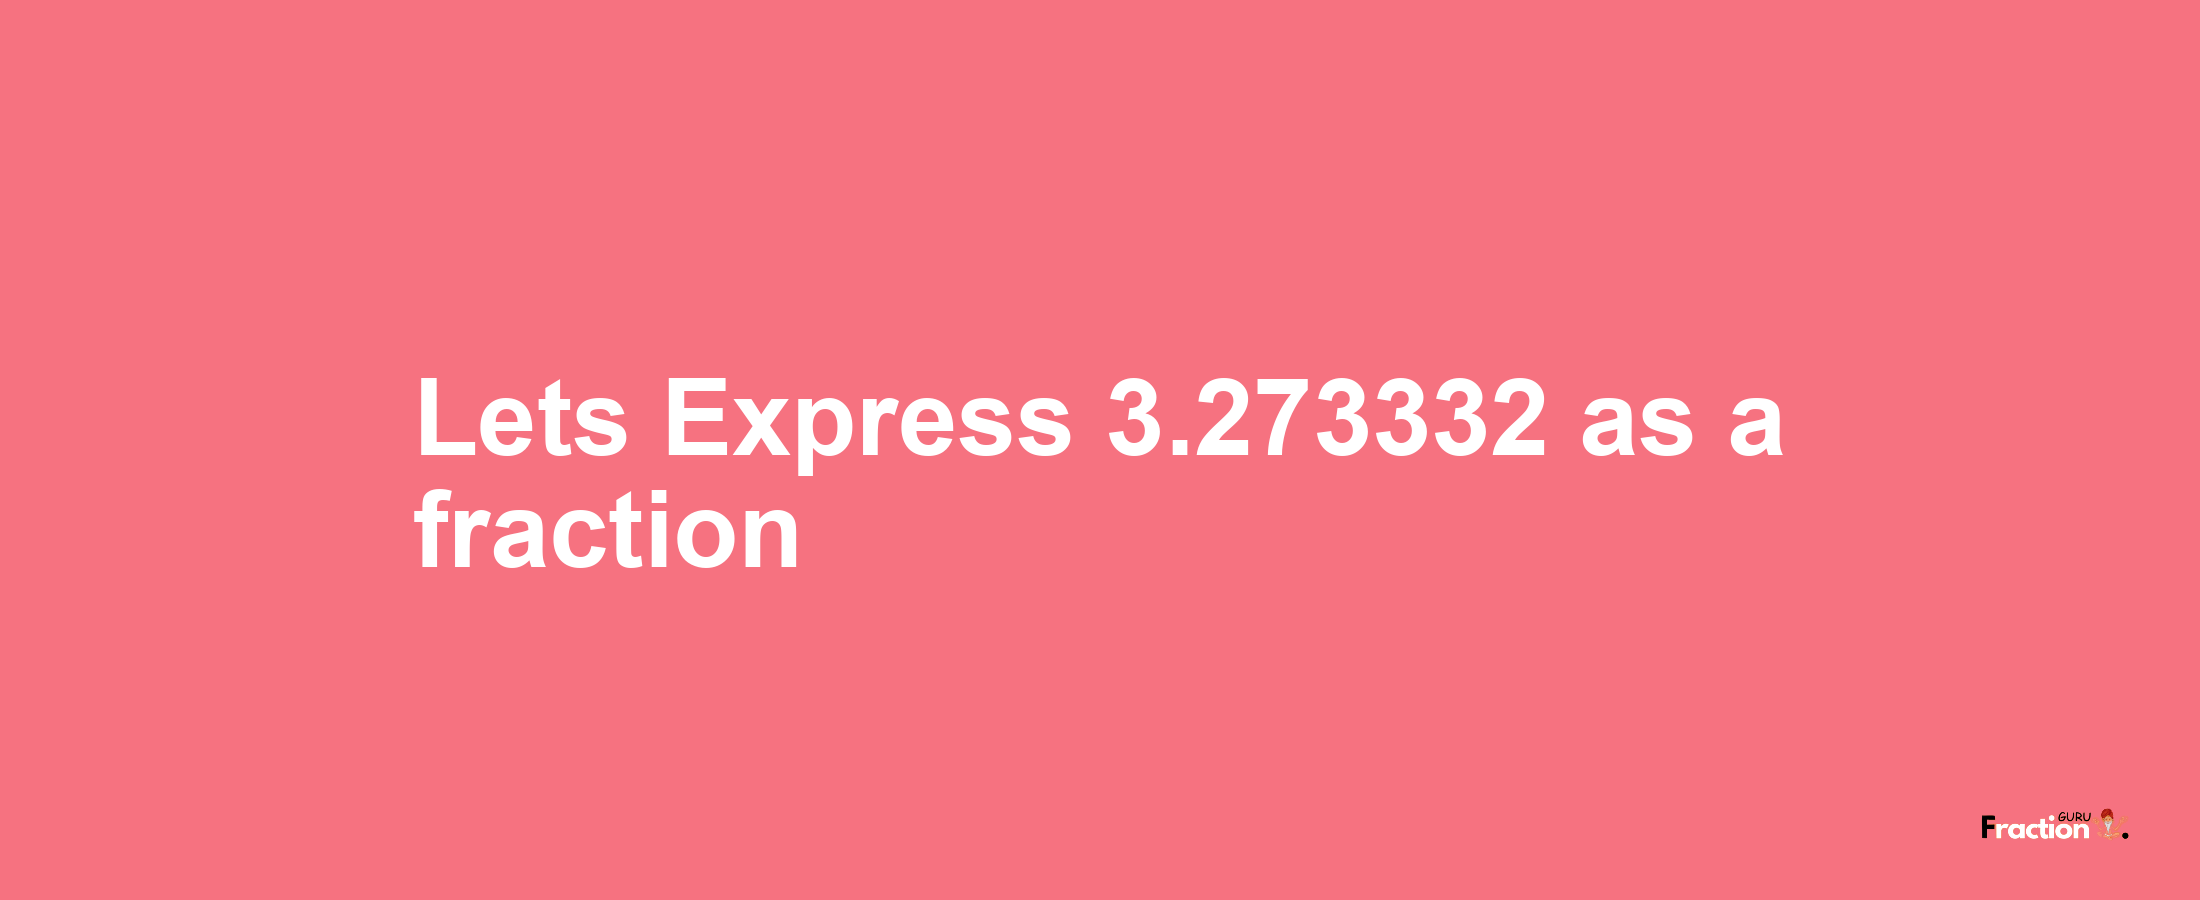 Lets Express 3.273332 as afraction